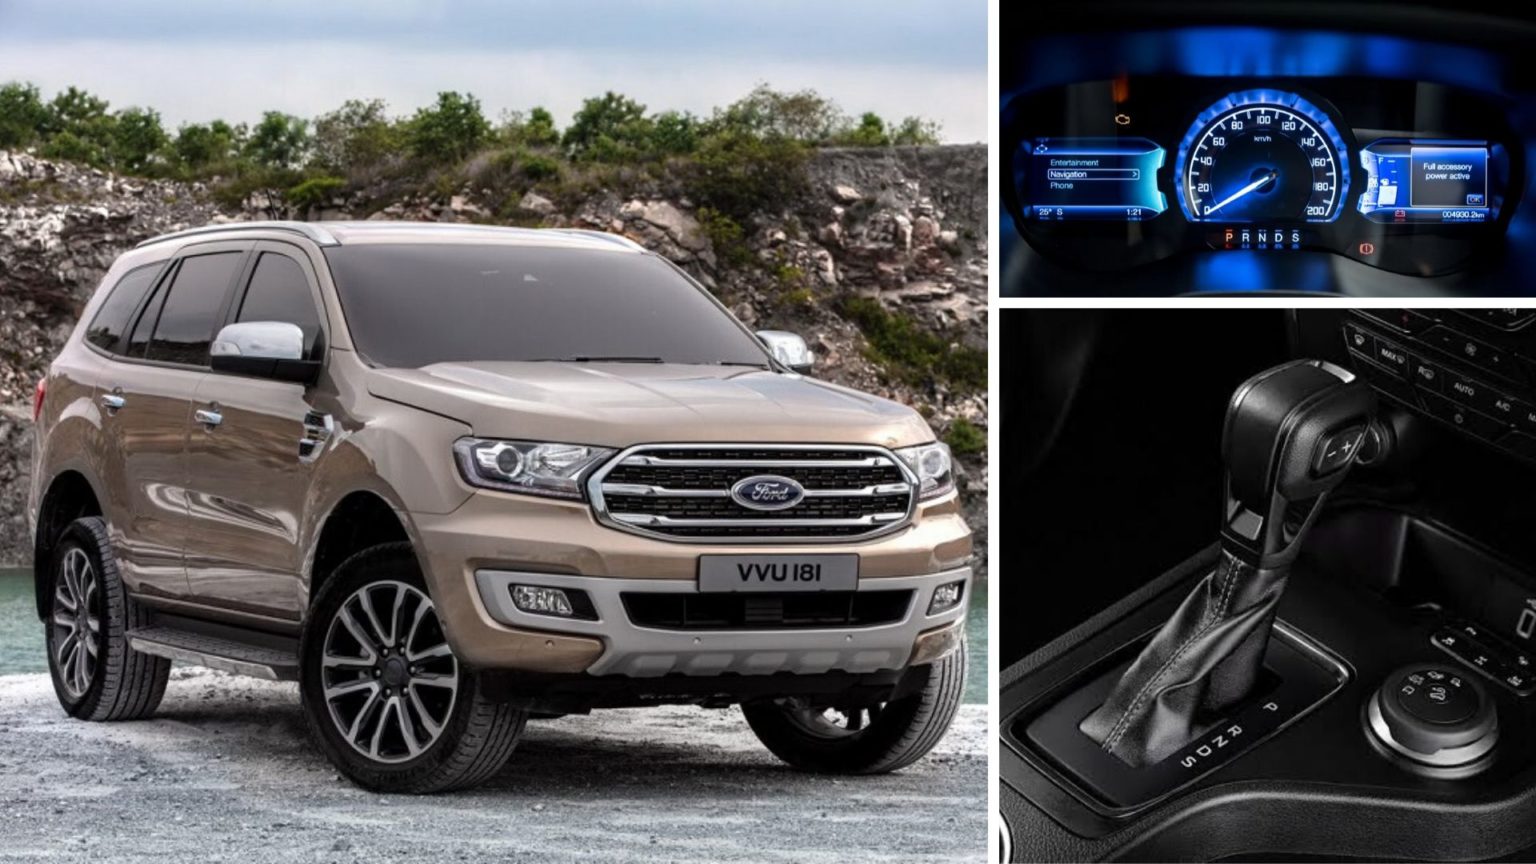 https://gaadiwaadi.com/wp-content/uploads/2020/01/2020-Ford-Endeavour-BS6-2.0L-Diesel-With-10-Speed-AT-Launch-Soon-1536x864.jpg